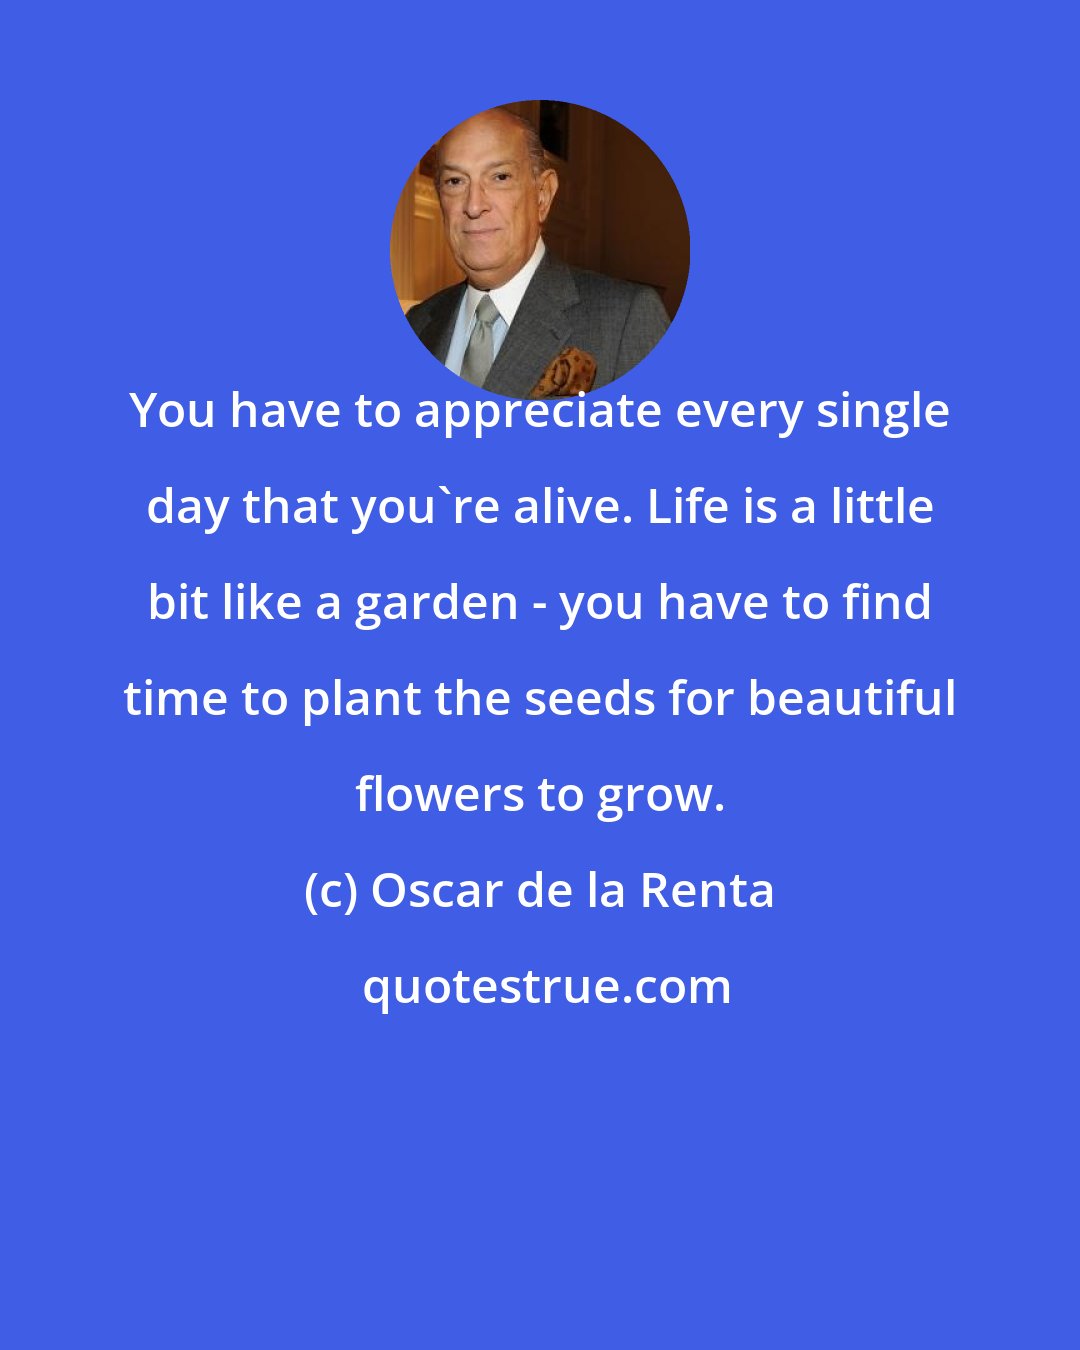 Oscar de la Renta: You have to appreciate every single day that you're alive. Life is a little bit like a garden - you have to find time to plant the seeds for beautiful flowers to grow.